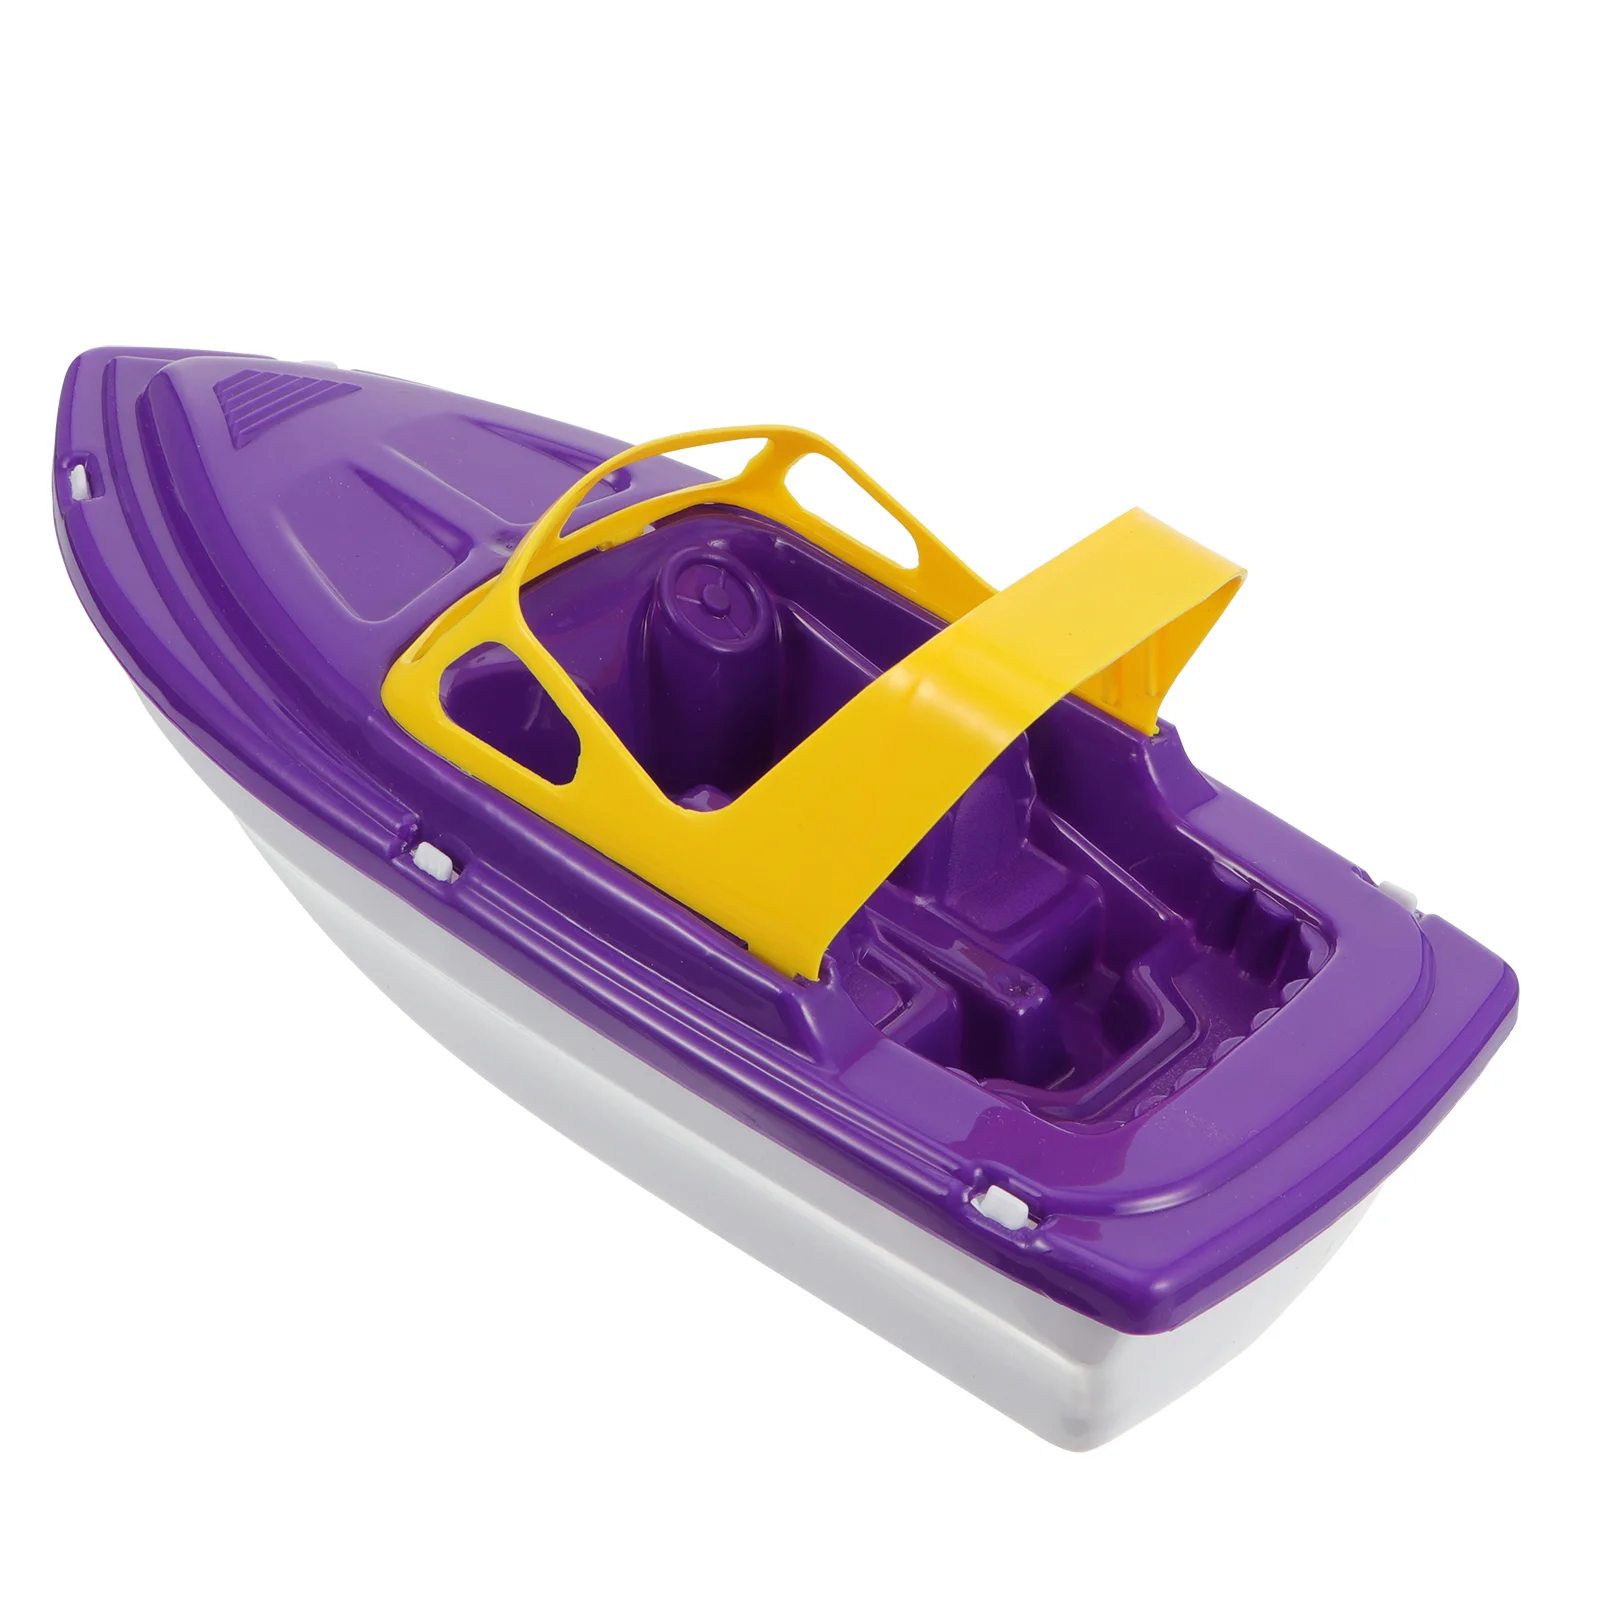 

Bath Pool Sailing Beach Sand Toys for Toddlers Pools Bathtub Party Favors